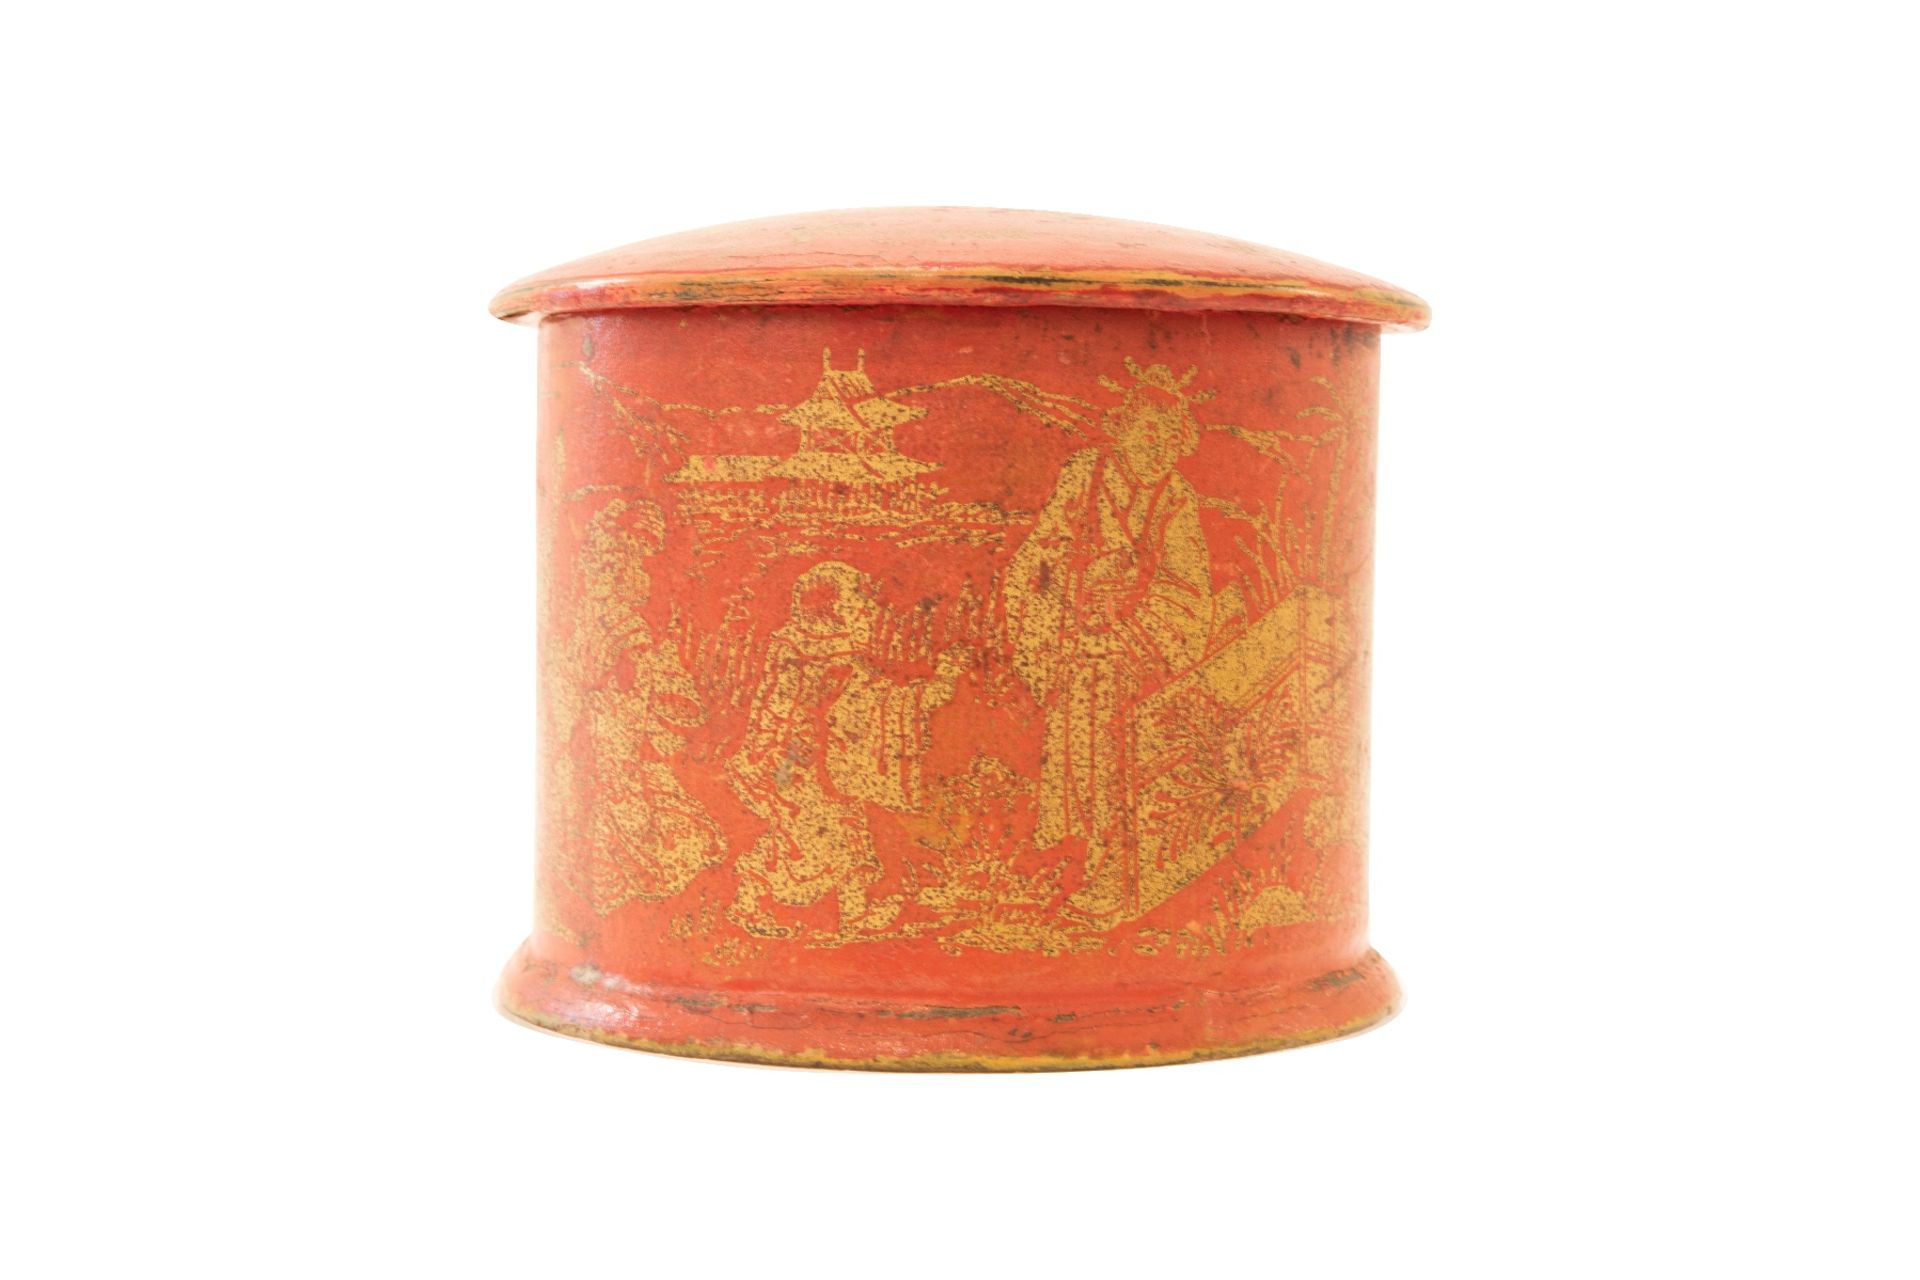 Small Chinese Lacquer Box - Image 3 of 4